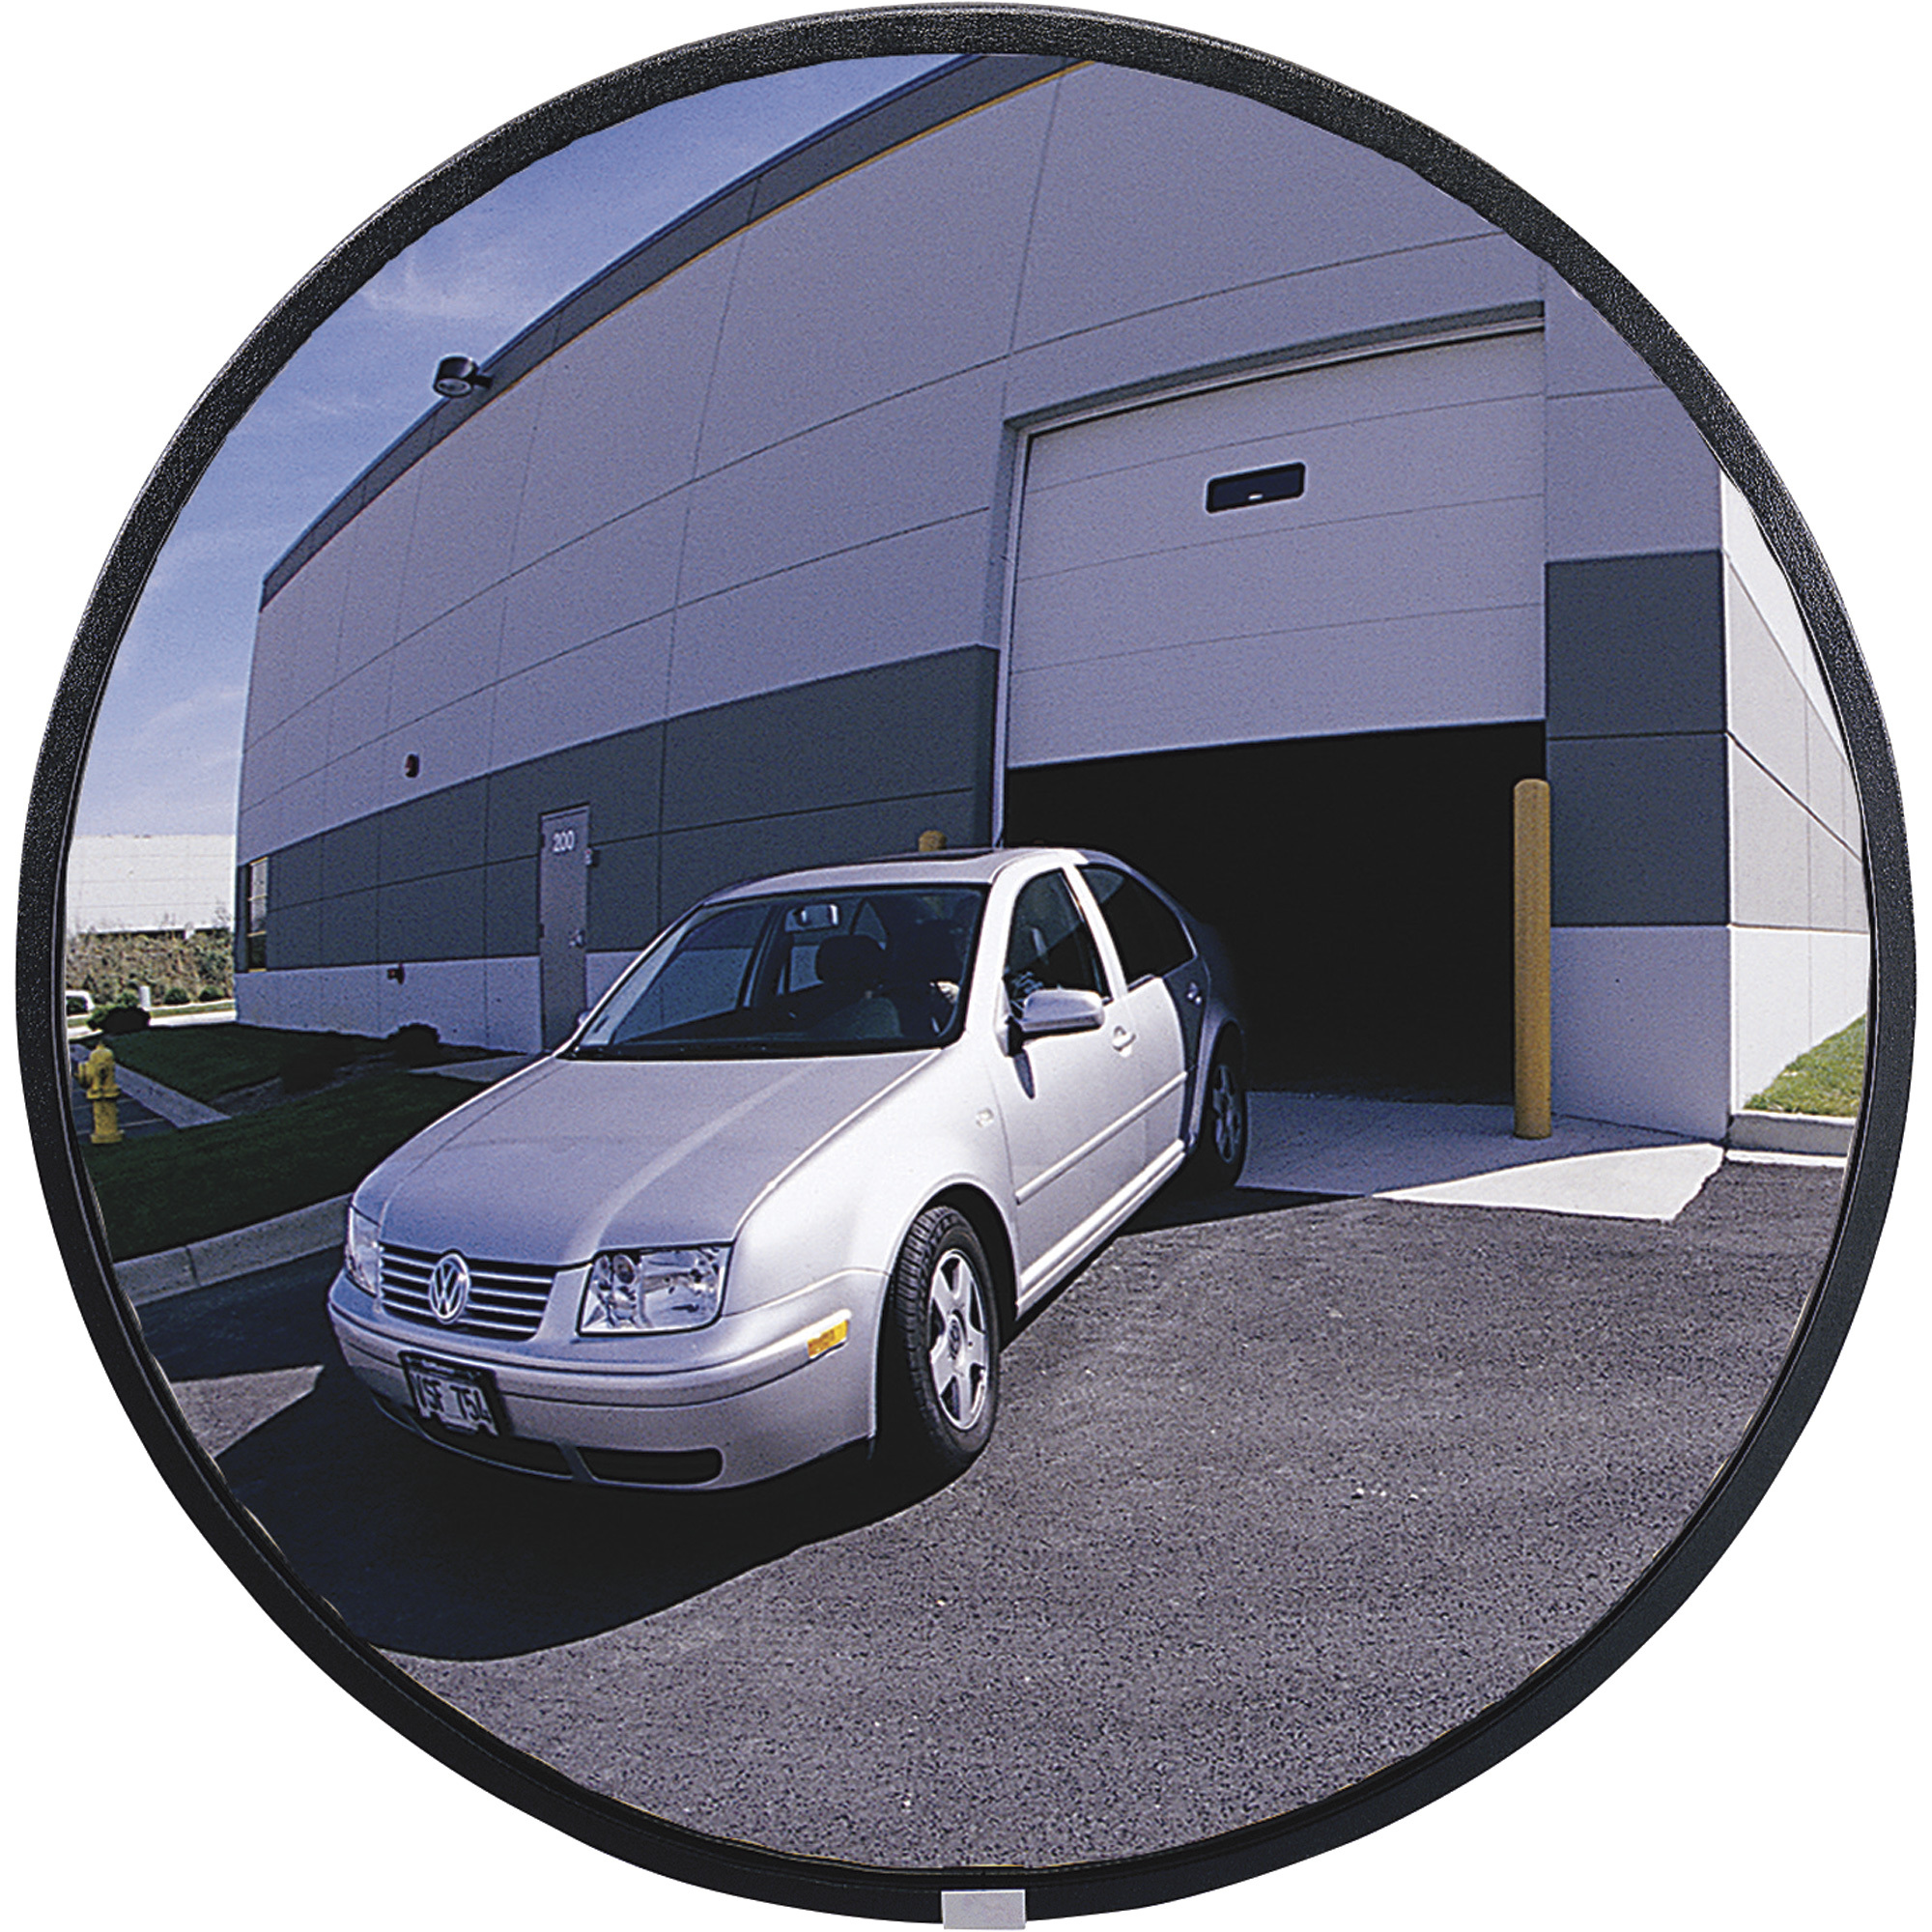 See All Outdoor Convex Safety Mirror â 26Inch Diameter, Acrylic, 28-Ft. View, Model PLX026